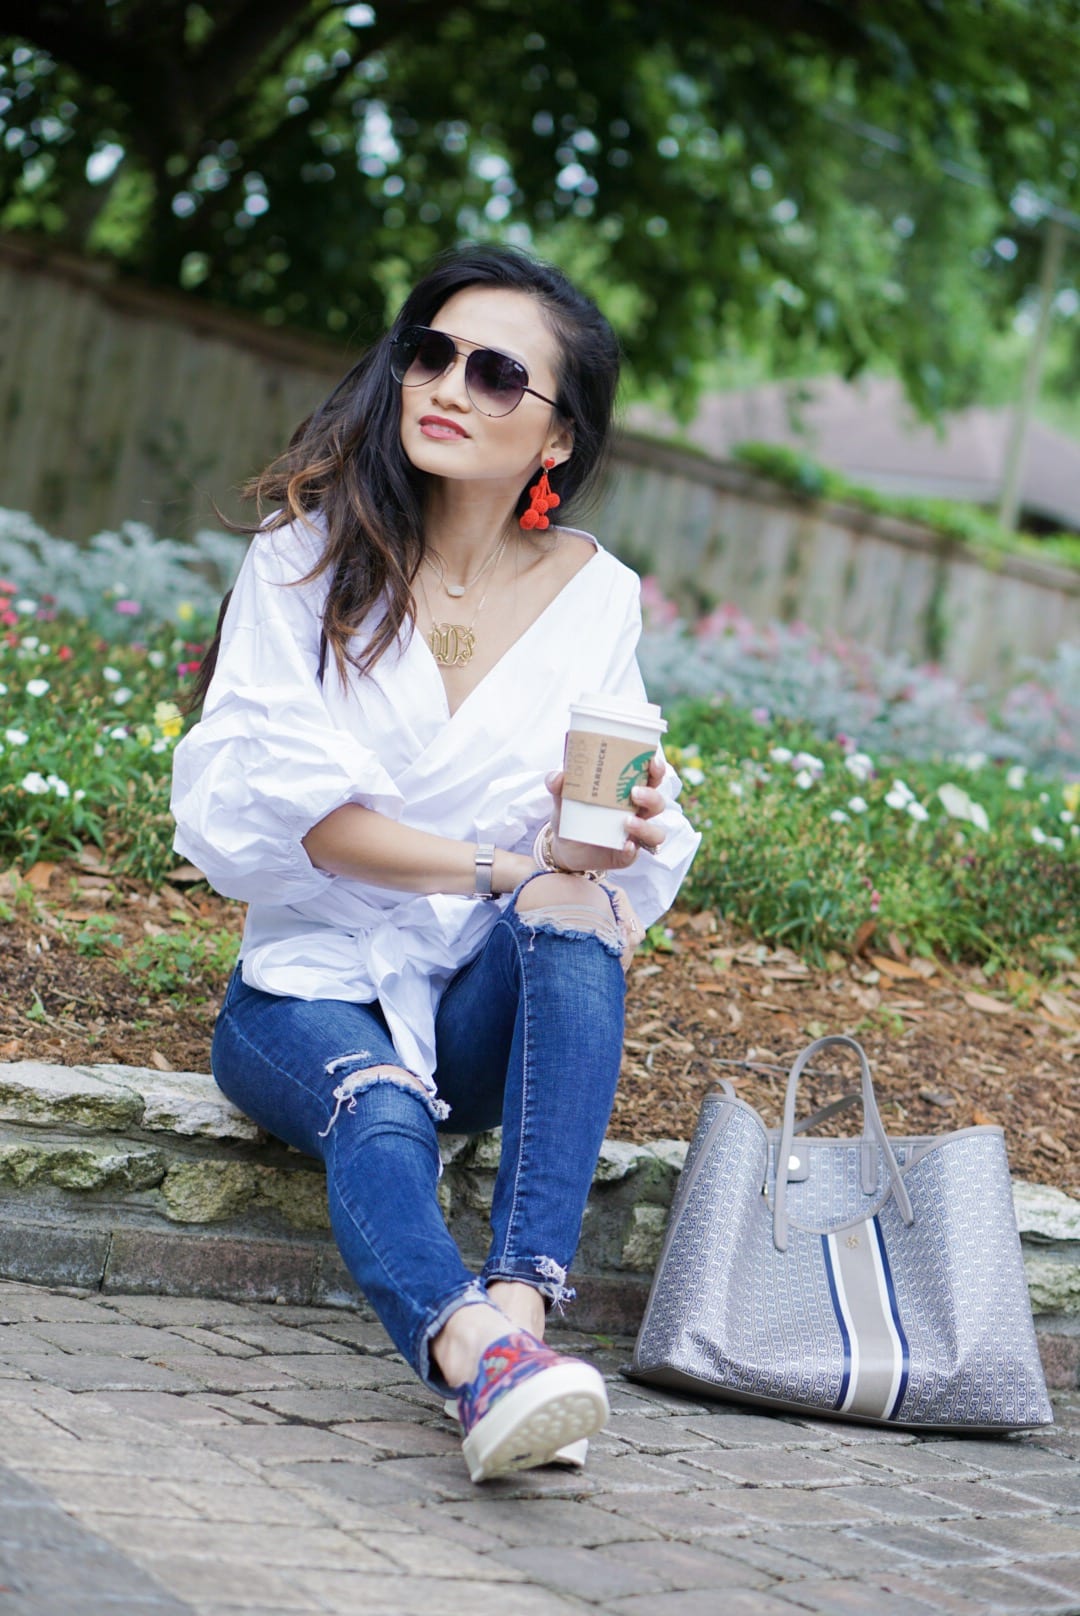 #stepwithstyle, #ad, productivity tips, working from home, Sofft shoes, Zappos, Tory Burch gemini tote, Tory Burch tote bag, embroidered slip ons, work wear style, work wear fashion, spring style, spring fashion, quay high key sunglasses, bauble bar earrings 